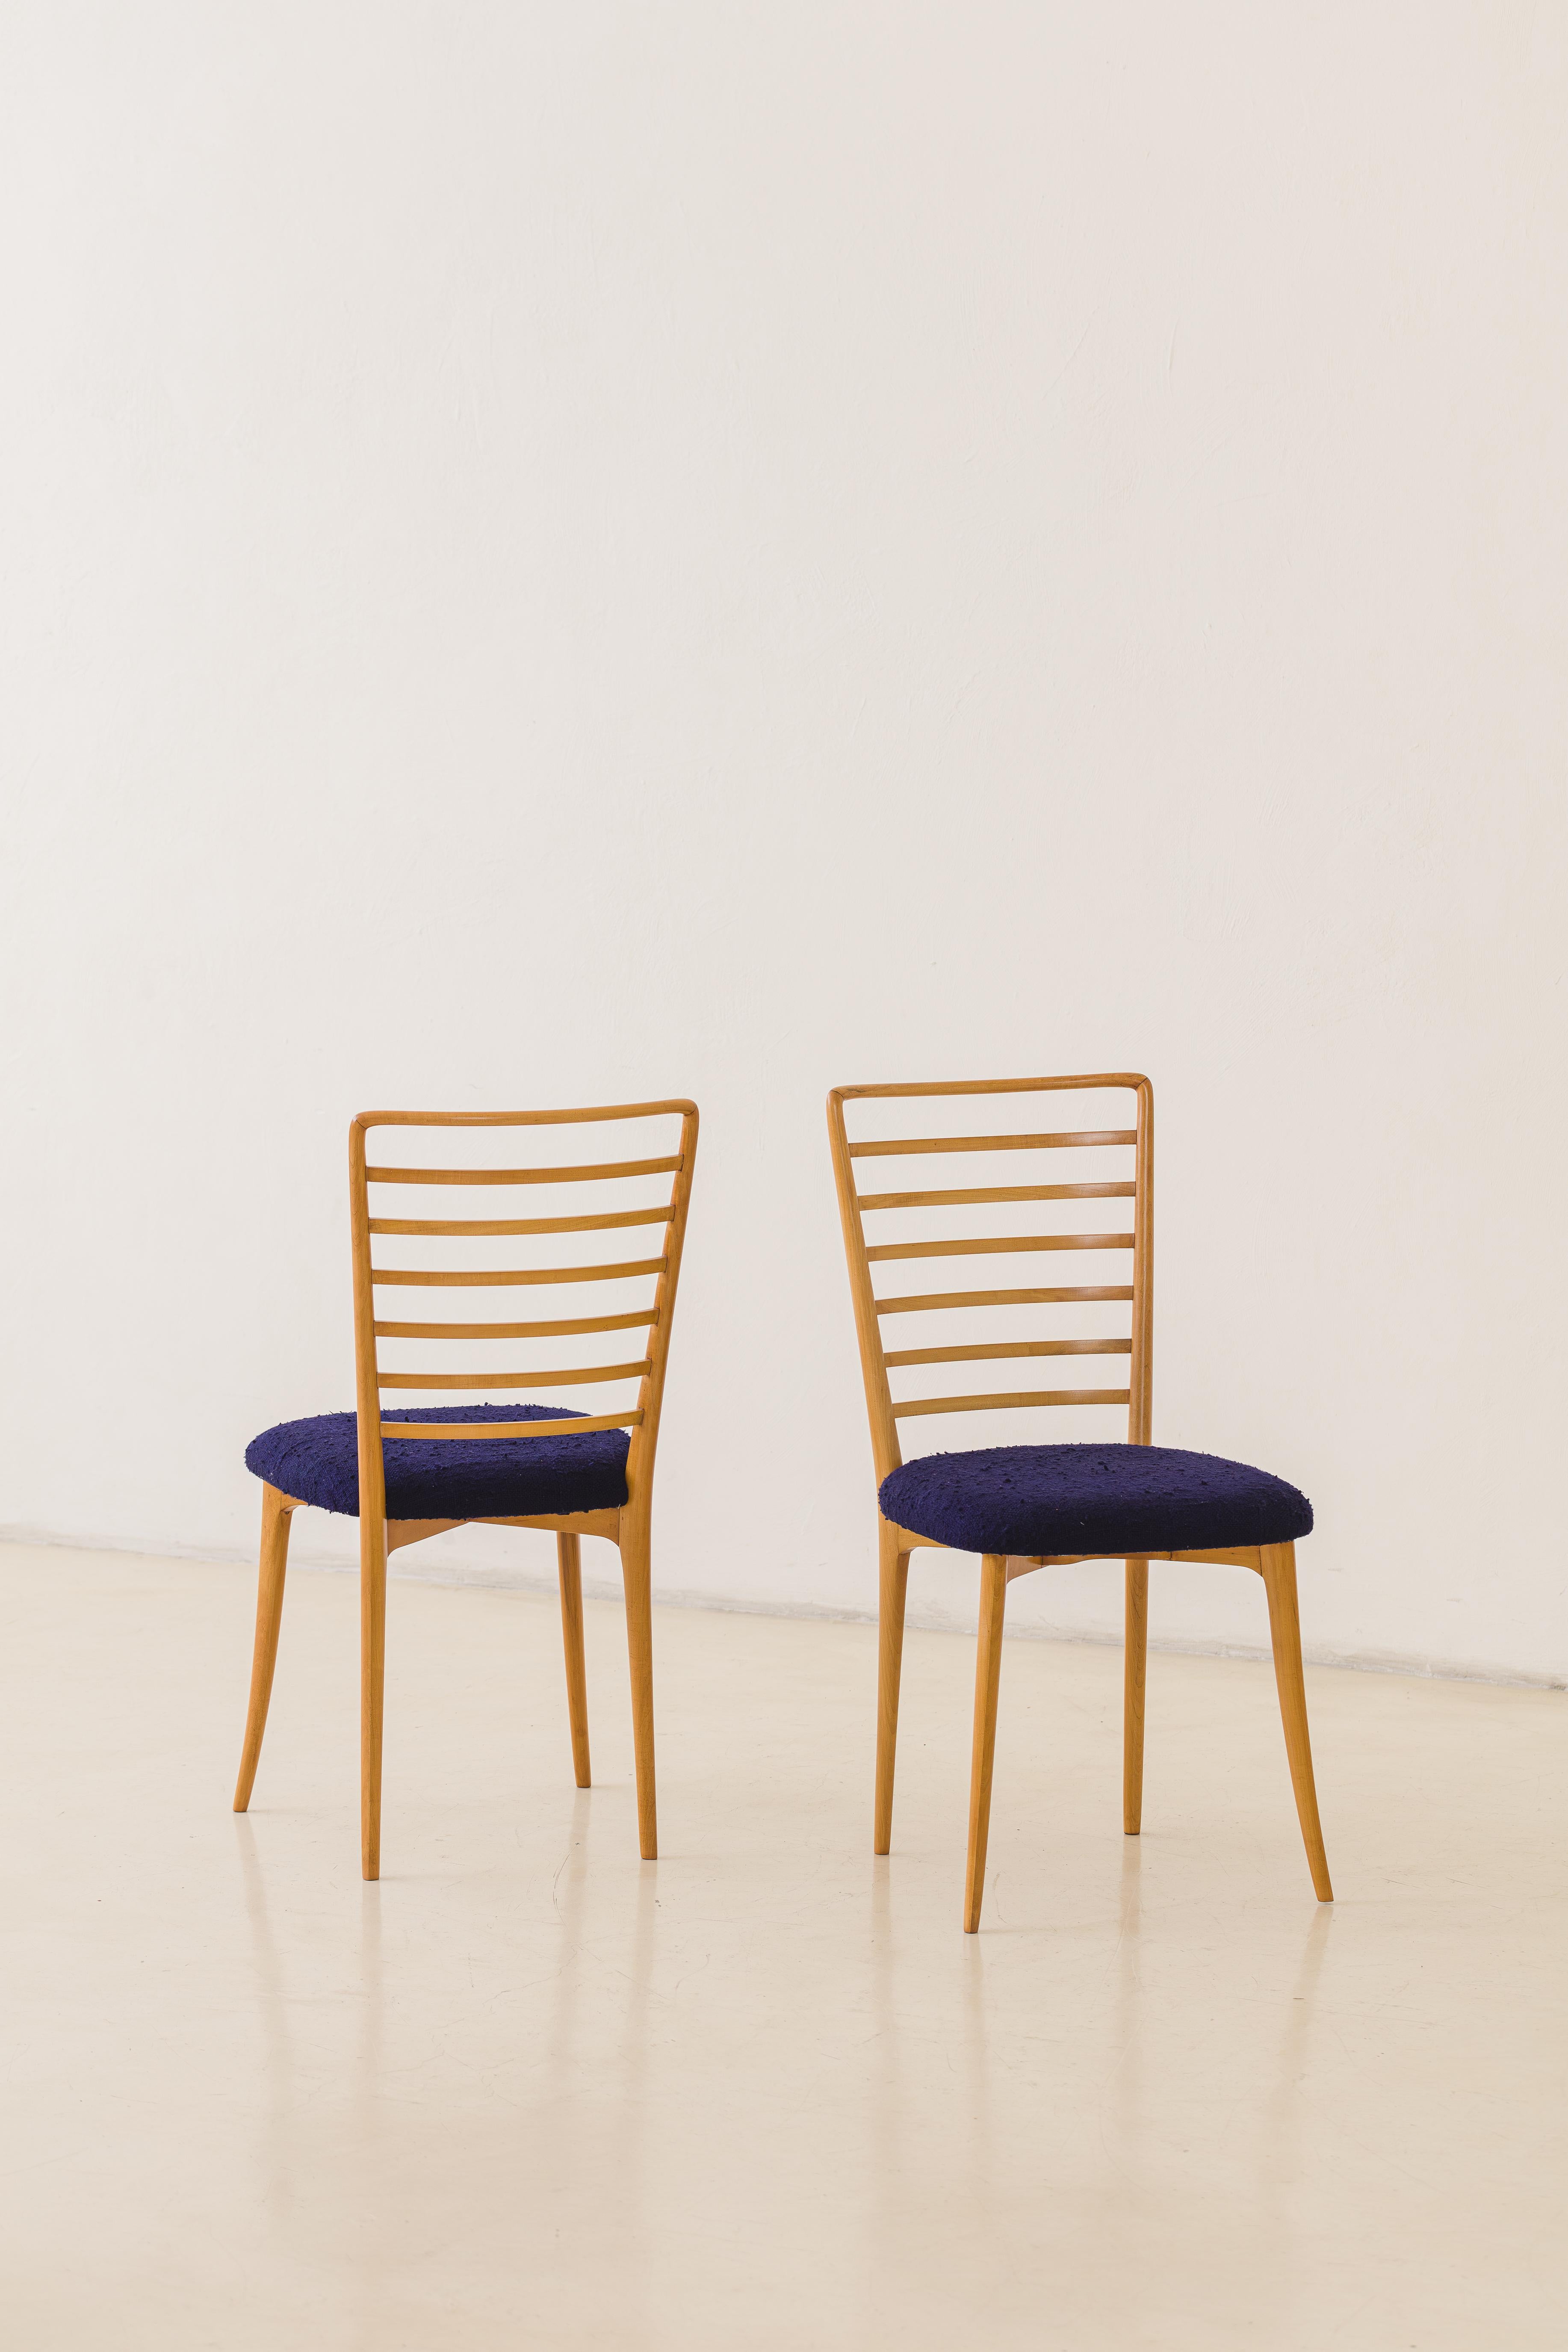 Mid-Century Modern Joaquim Tenreiro Dining Chairs, Solid Wood and Fabric, MidCentury, Brazil, 1950s For Sale